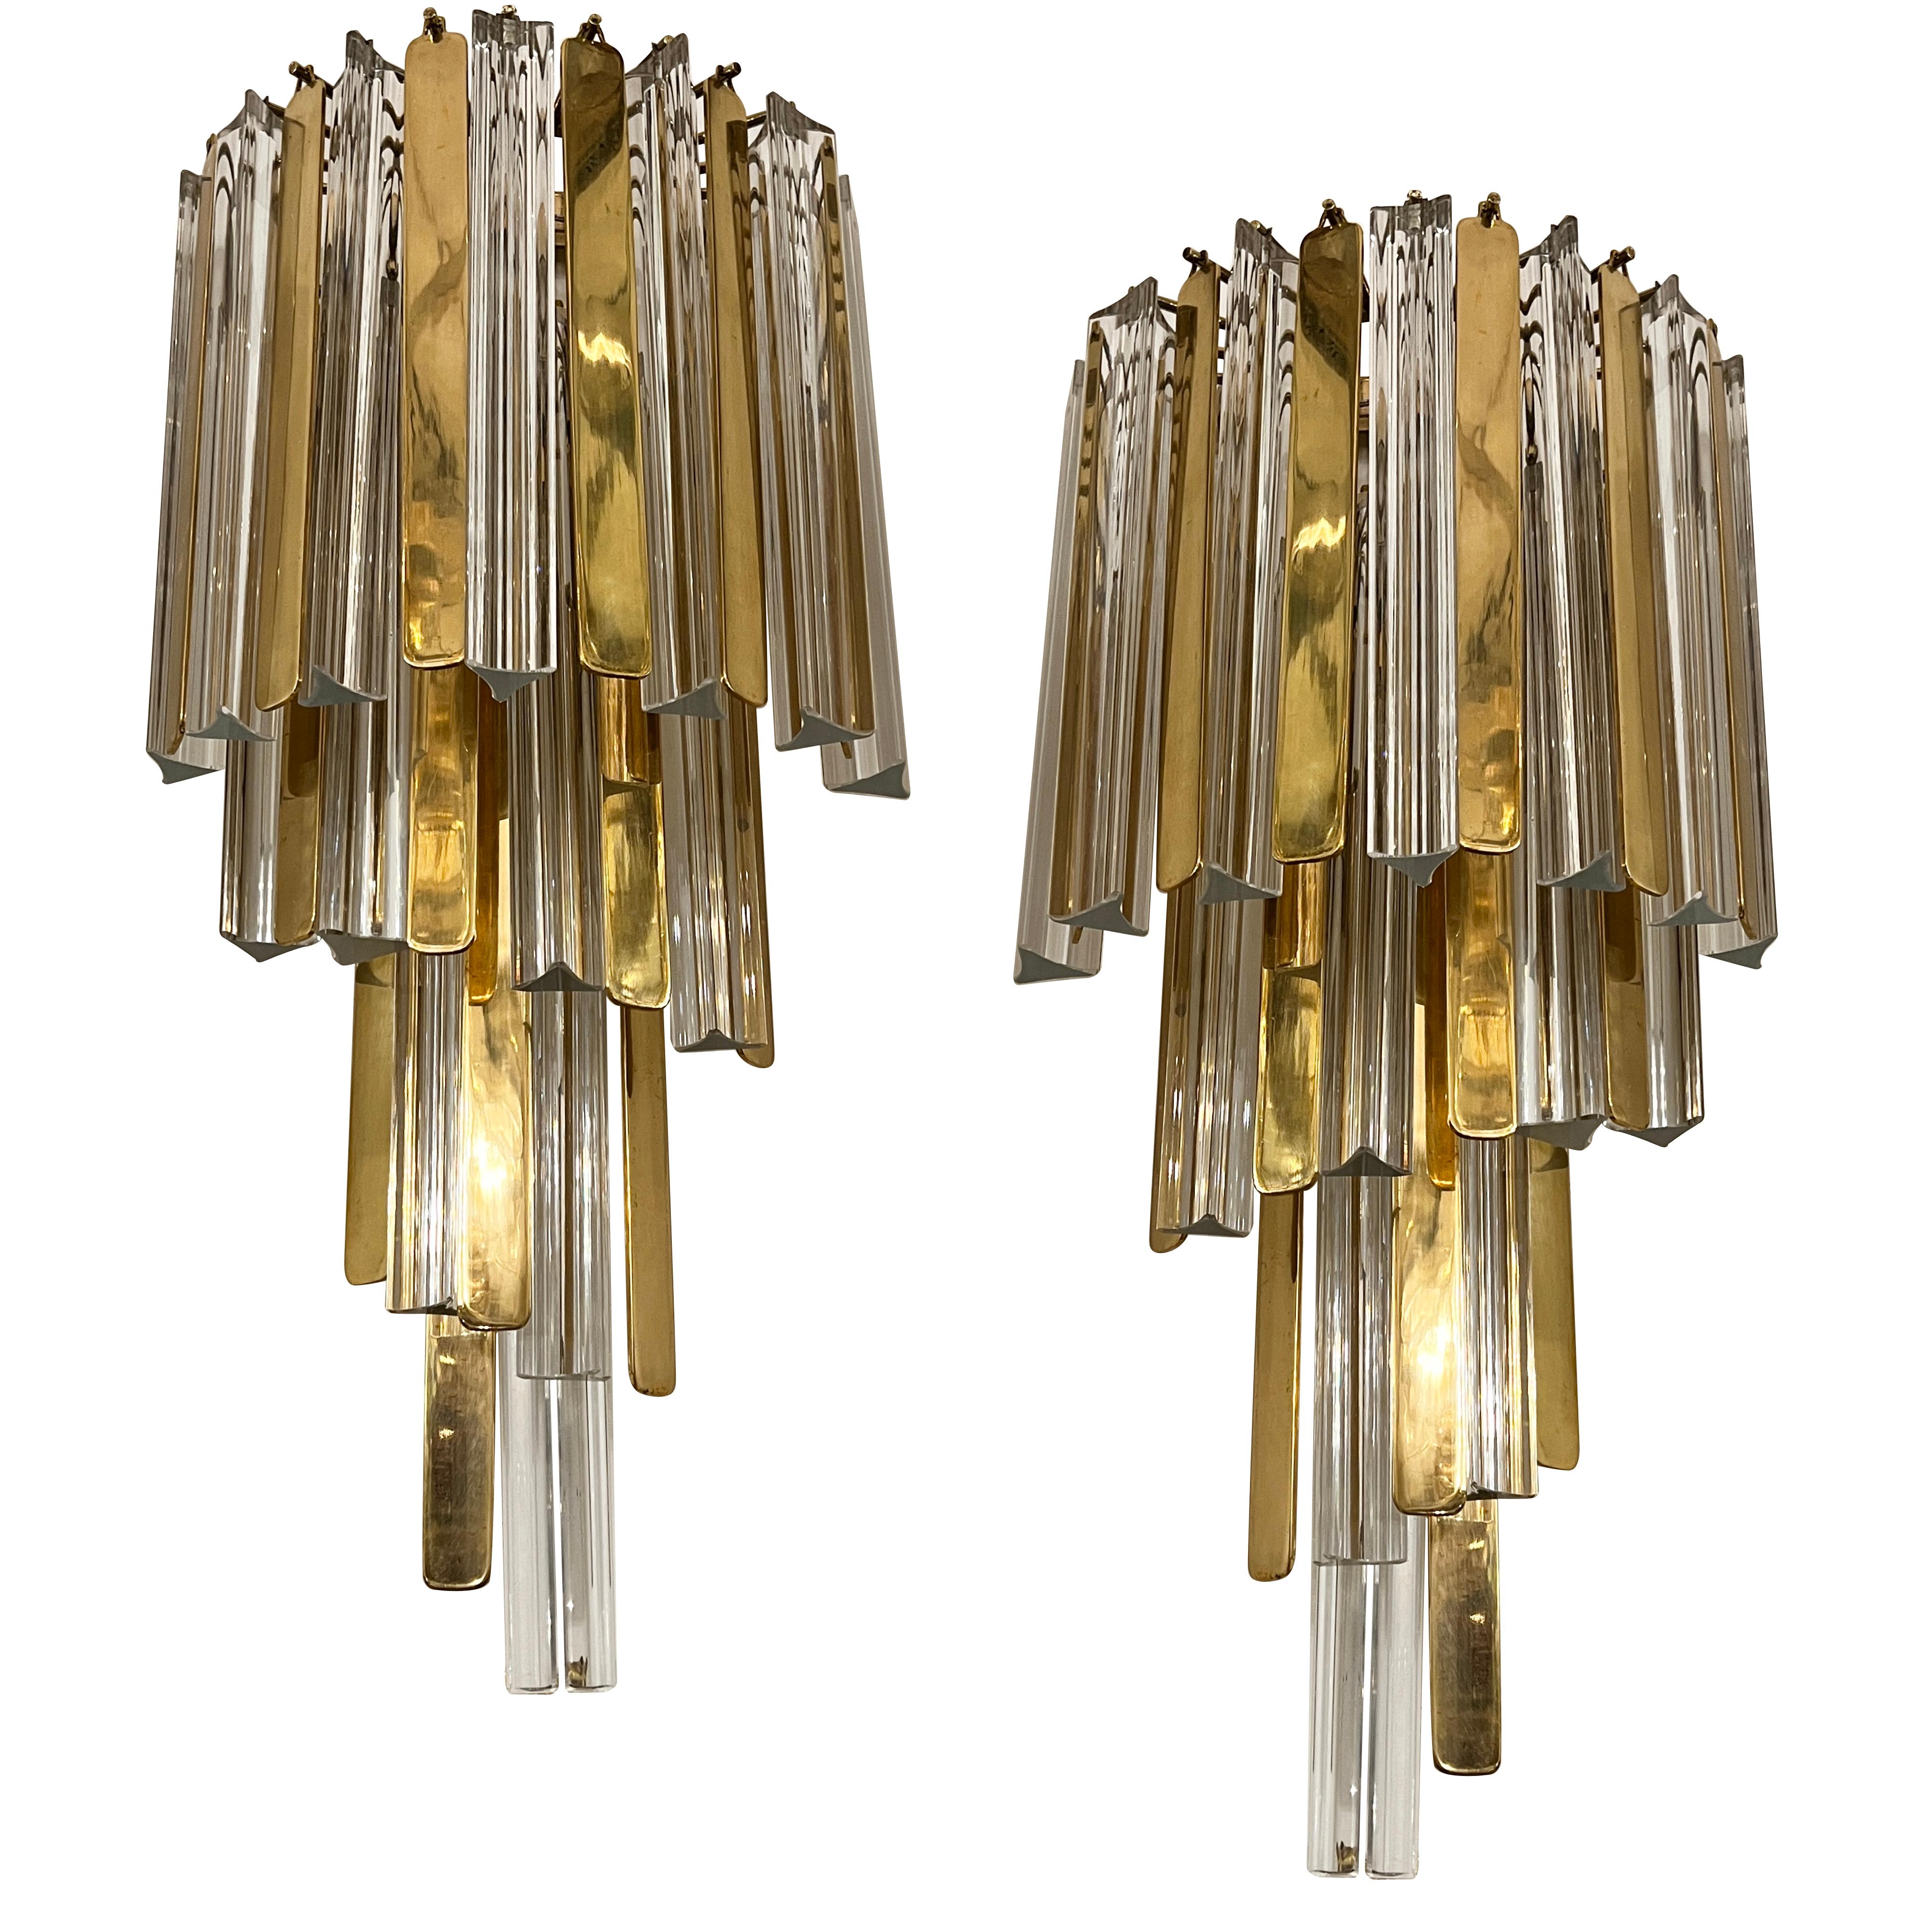 A pair of large circa 1960's Italian glass and bronze sconces with two interior lights each.

Measurements:
Height: 26